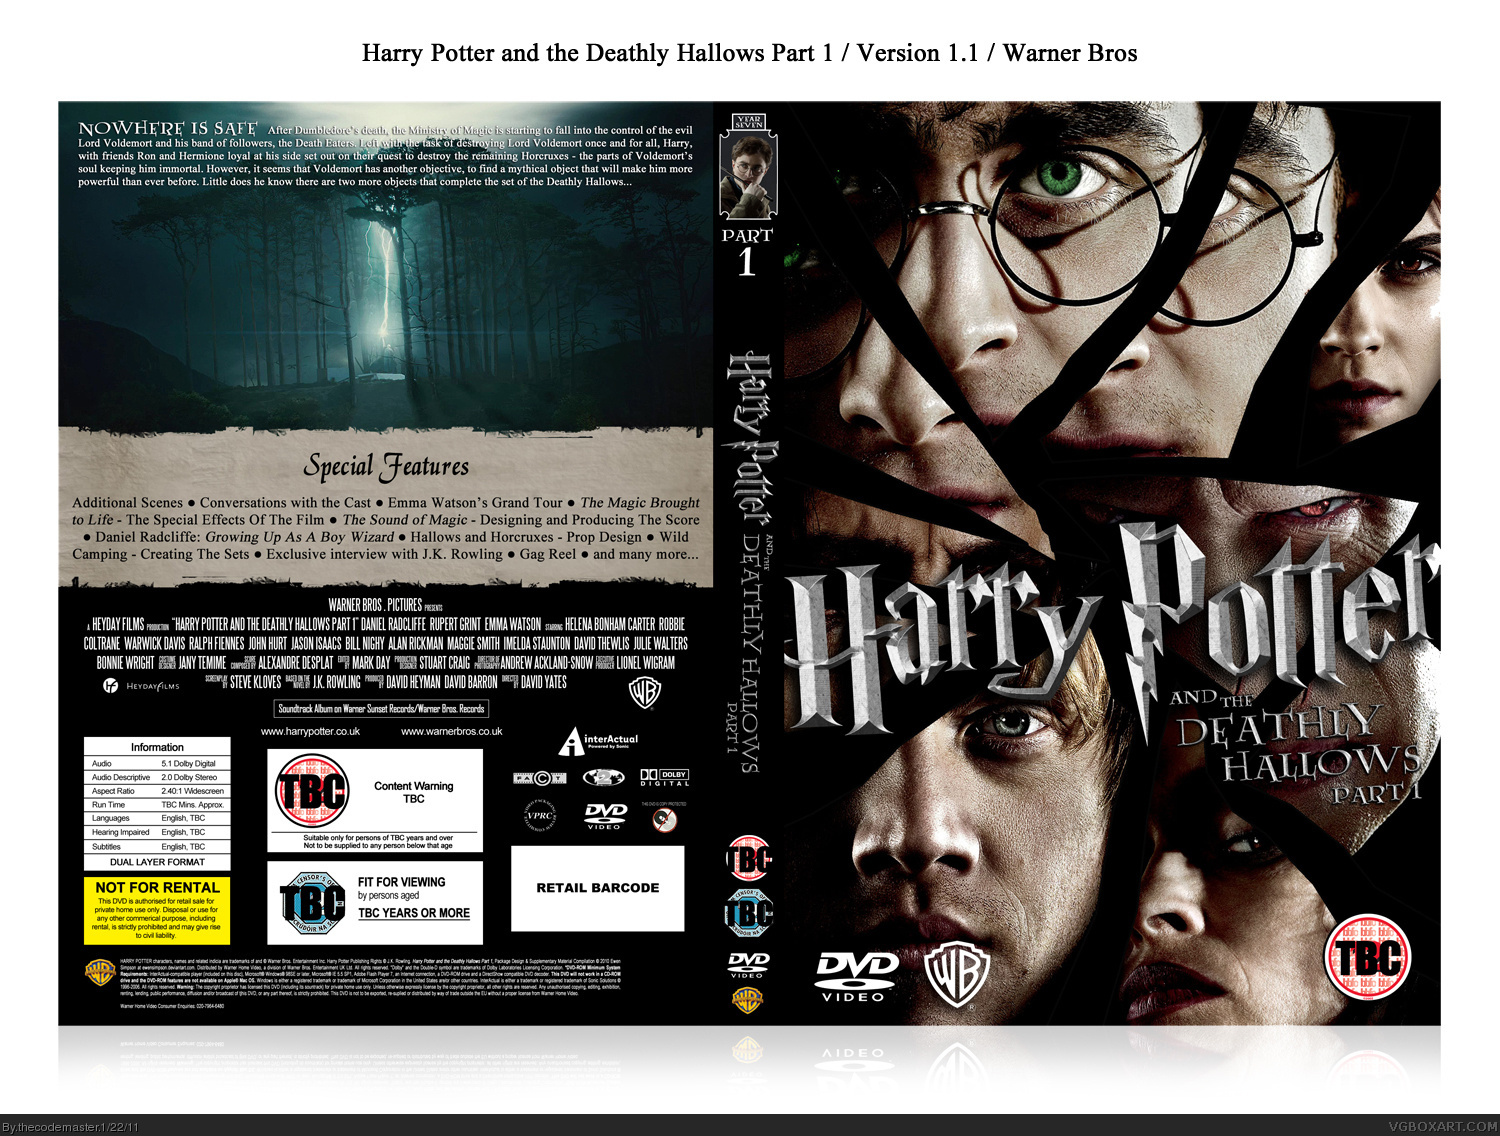 Harry Potter and the Deathly Hallows: Part 1 box cover